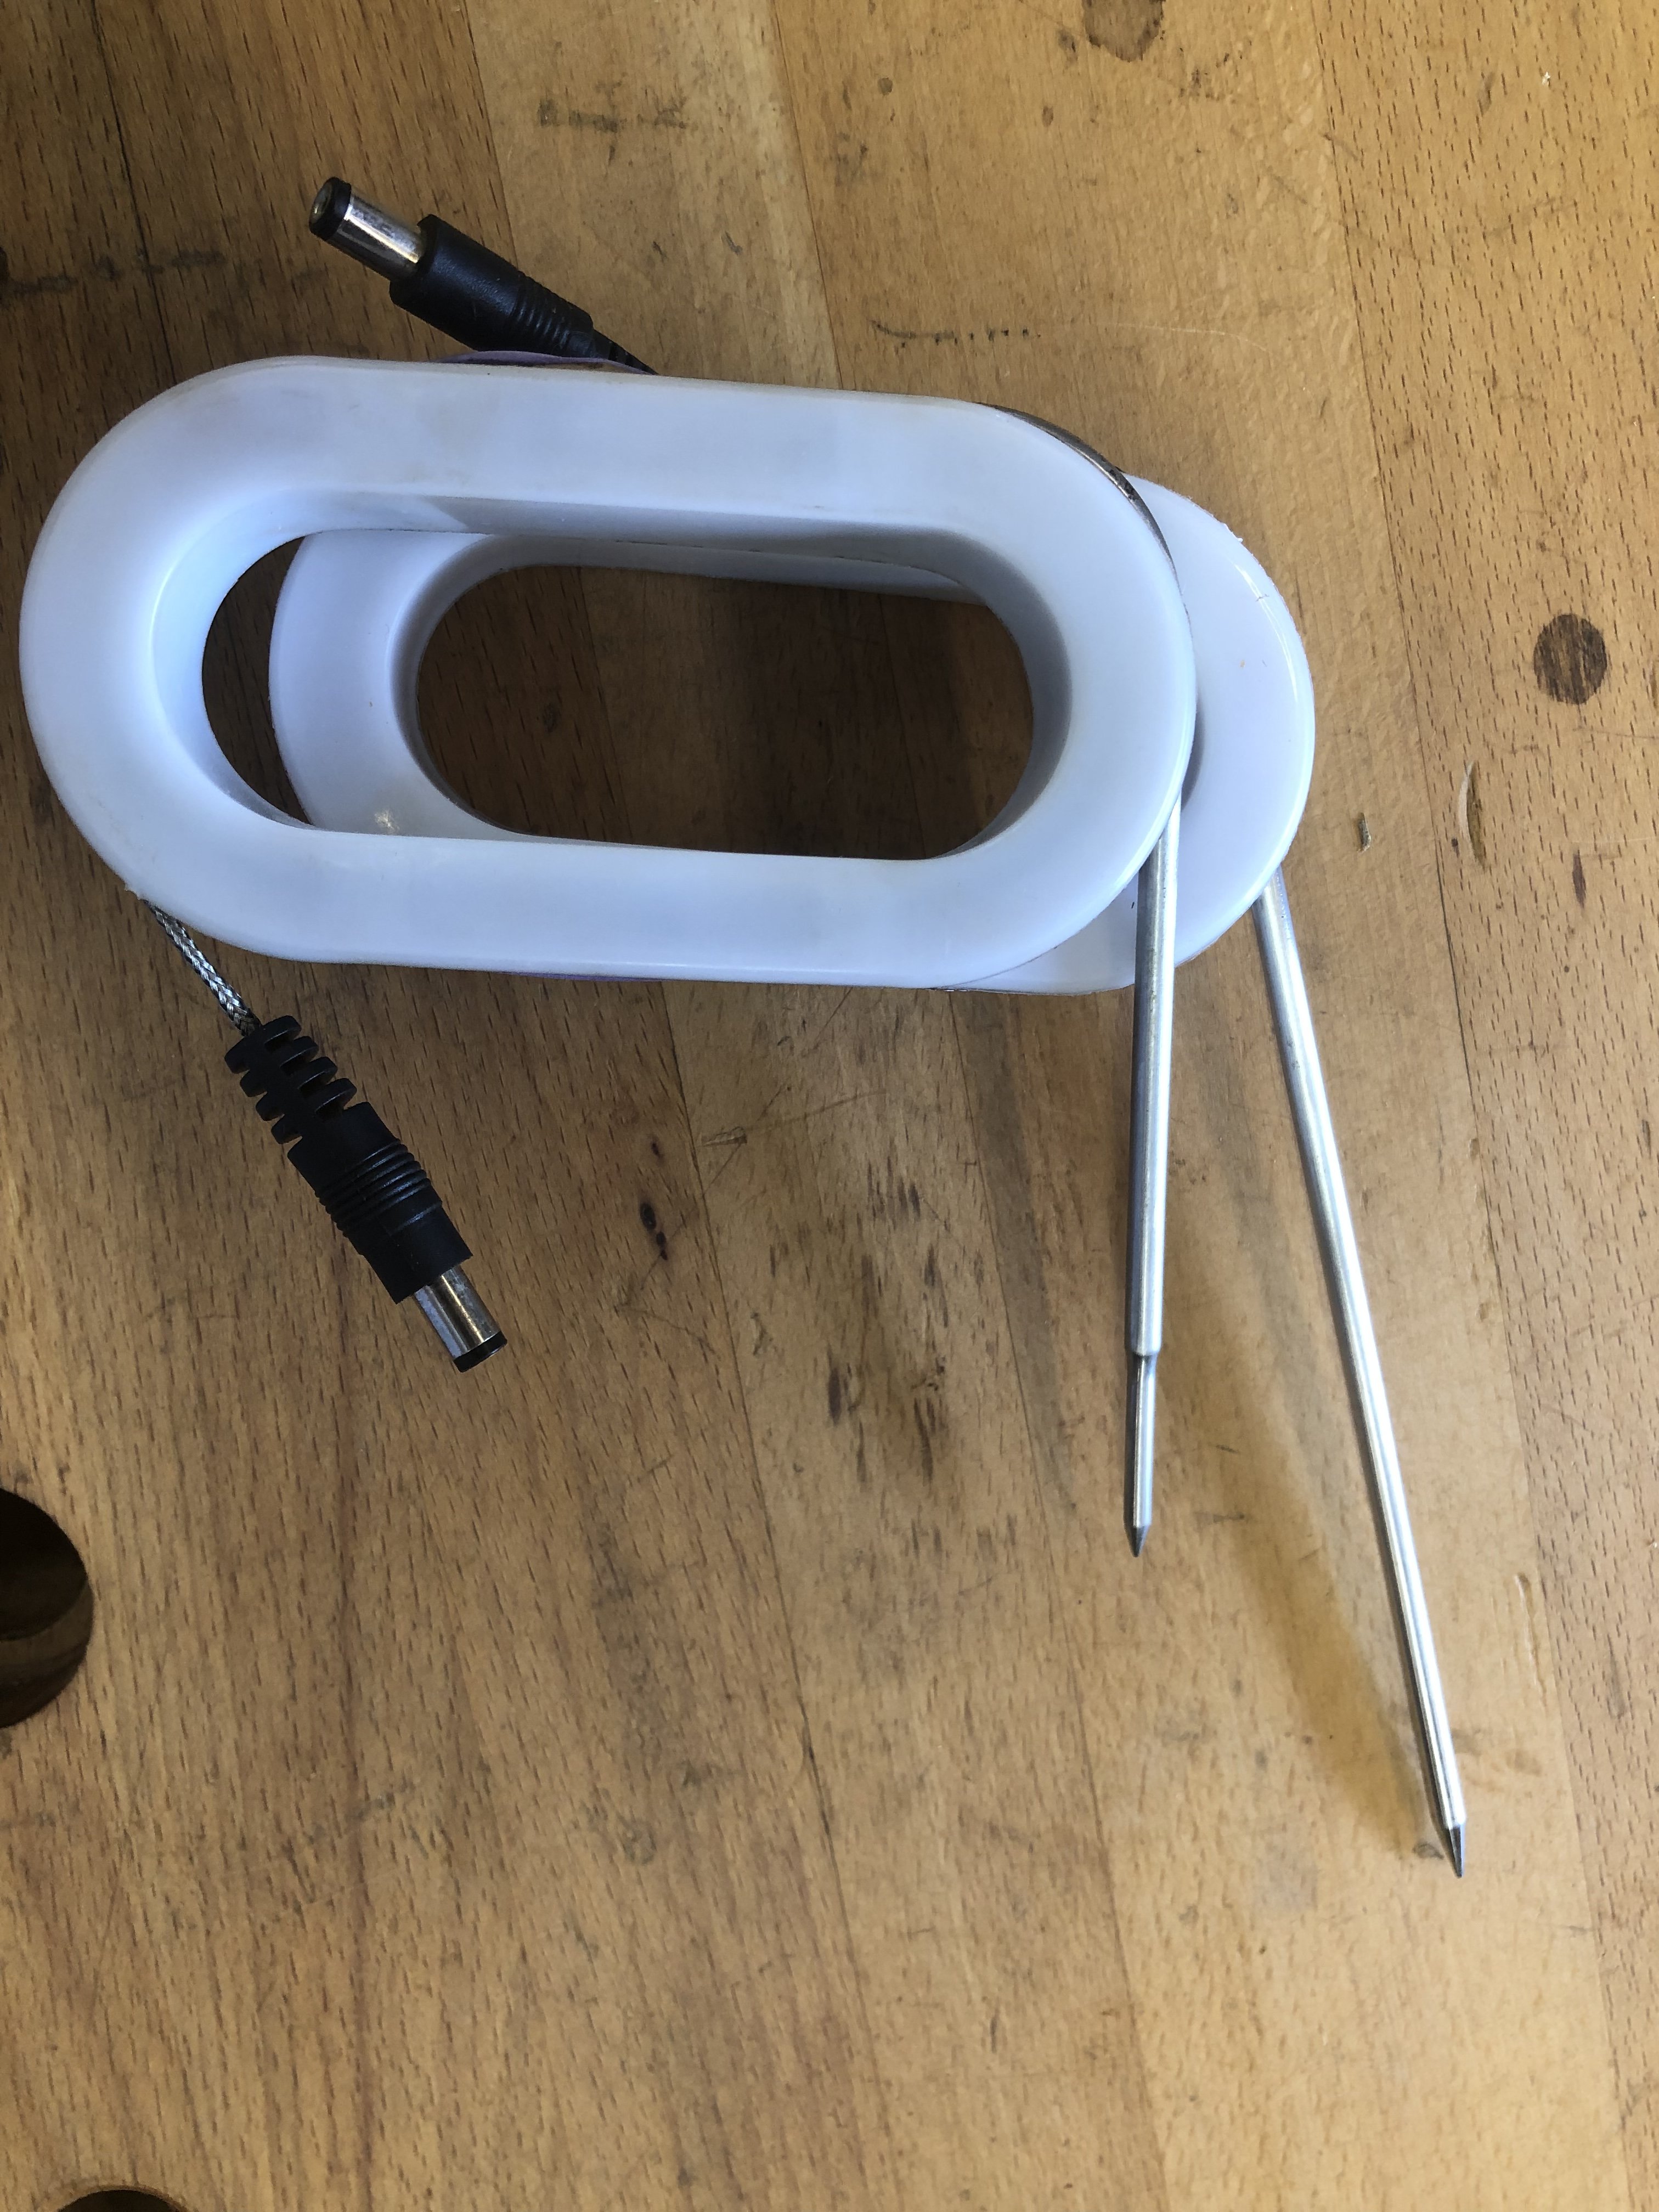 Replacement Meat Probe for Rec Tec Pellet Grills, RT-MTPRB